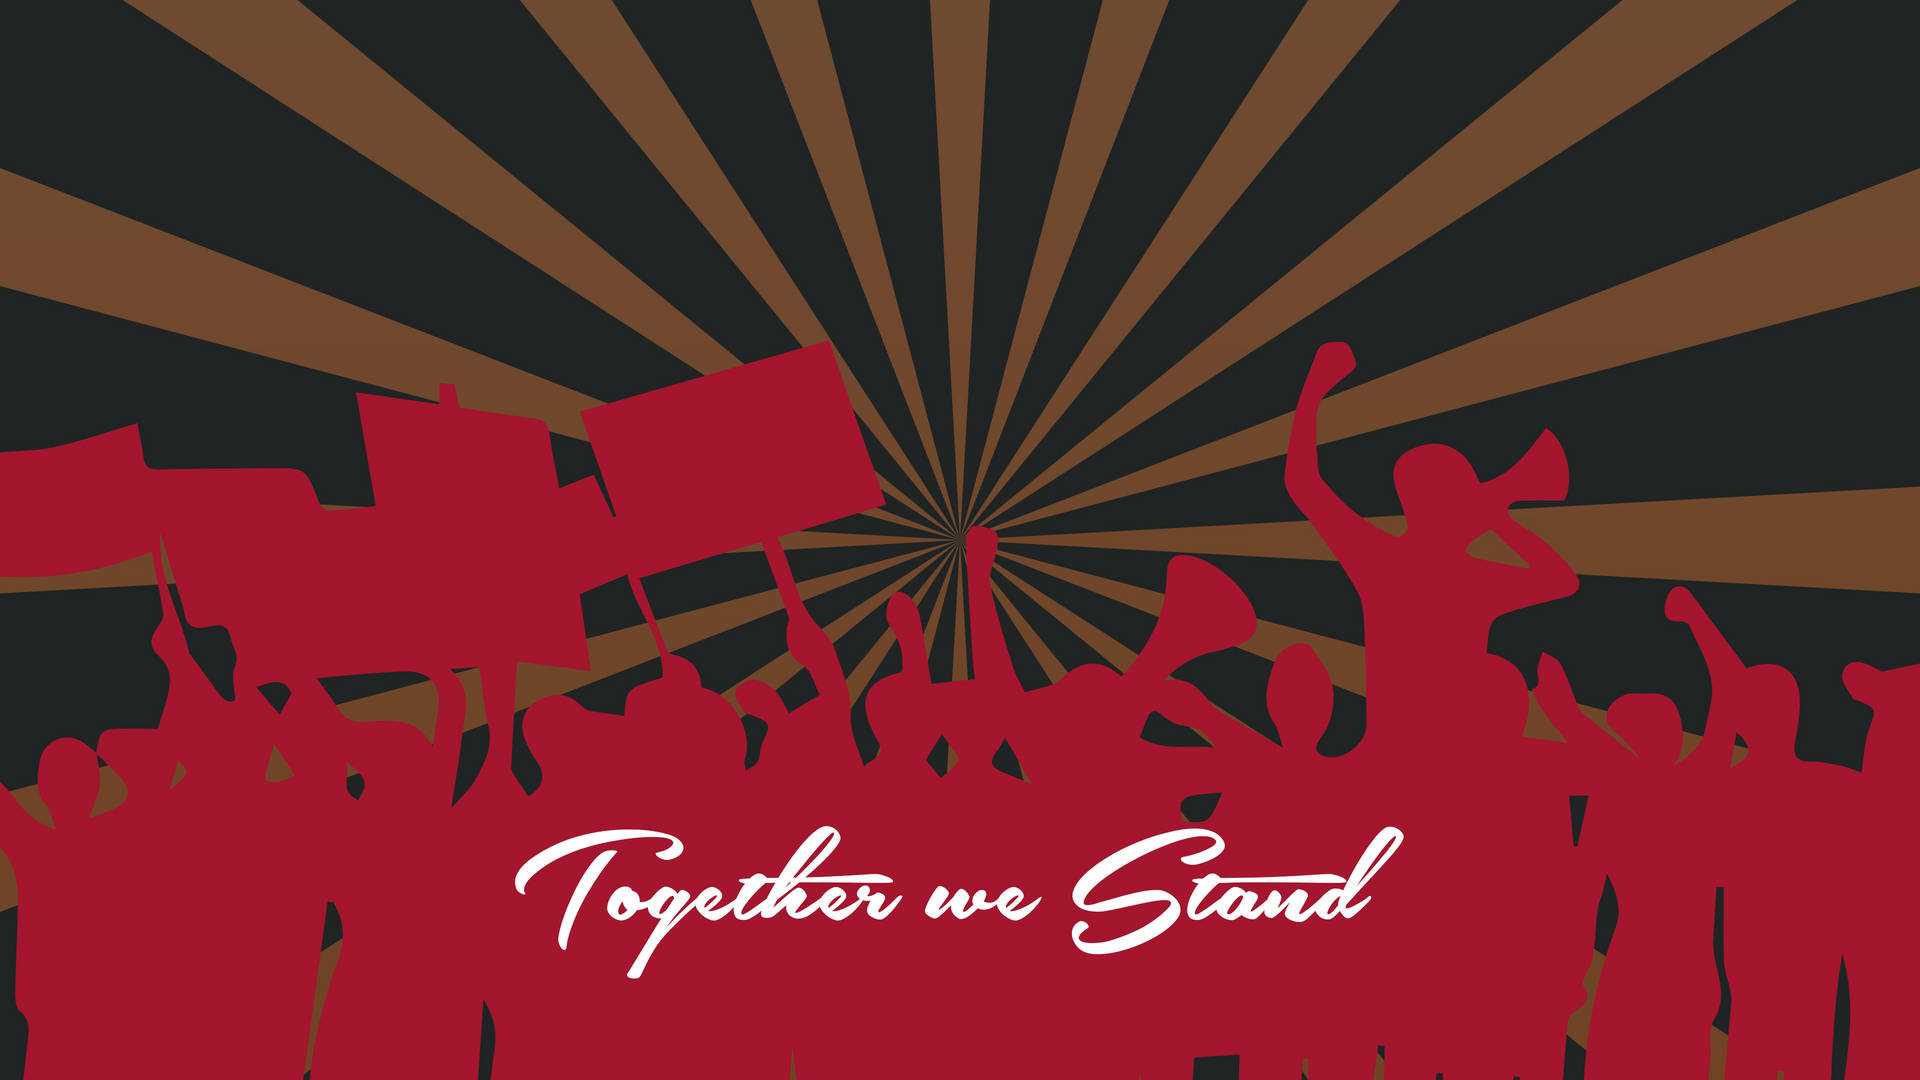 May Day Together We Stand Wallpaper